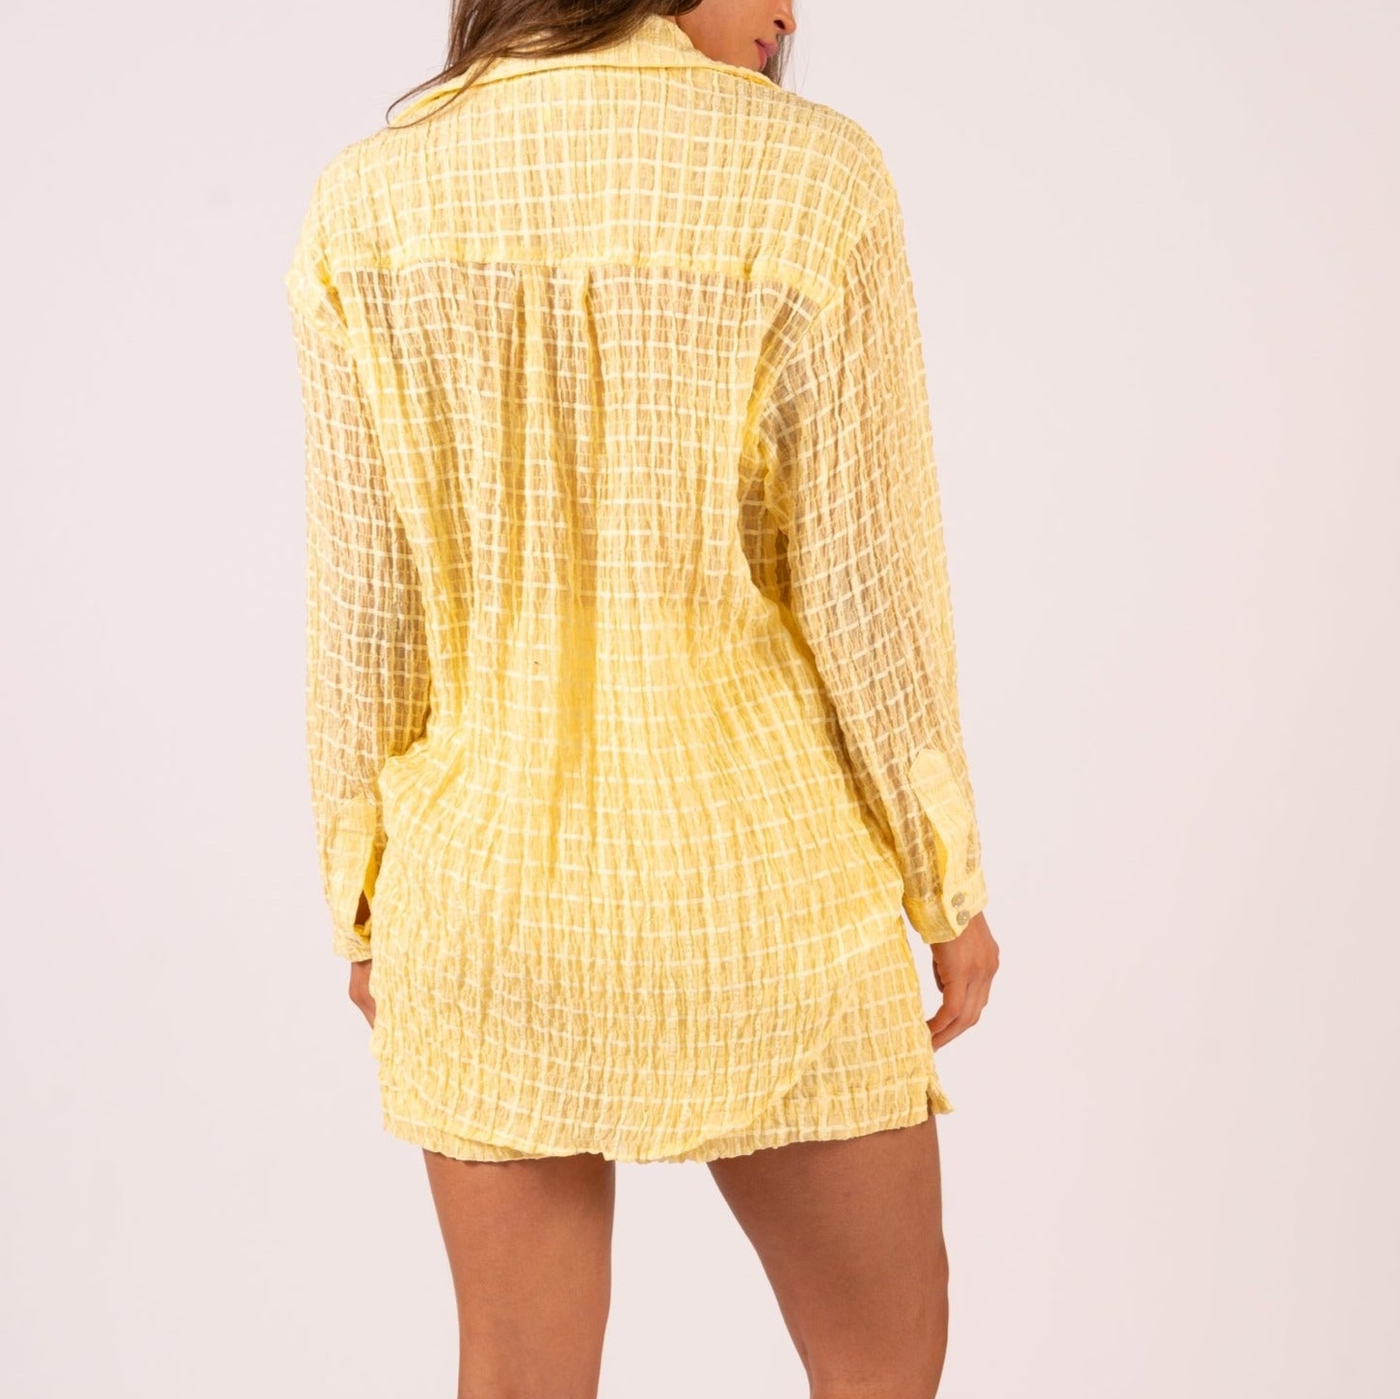 Gotstyle Fashion - We Are The Others Blouses Checks Crinkle Shirt - Yellow